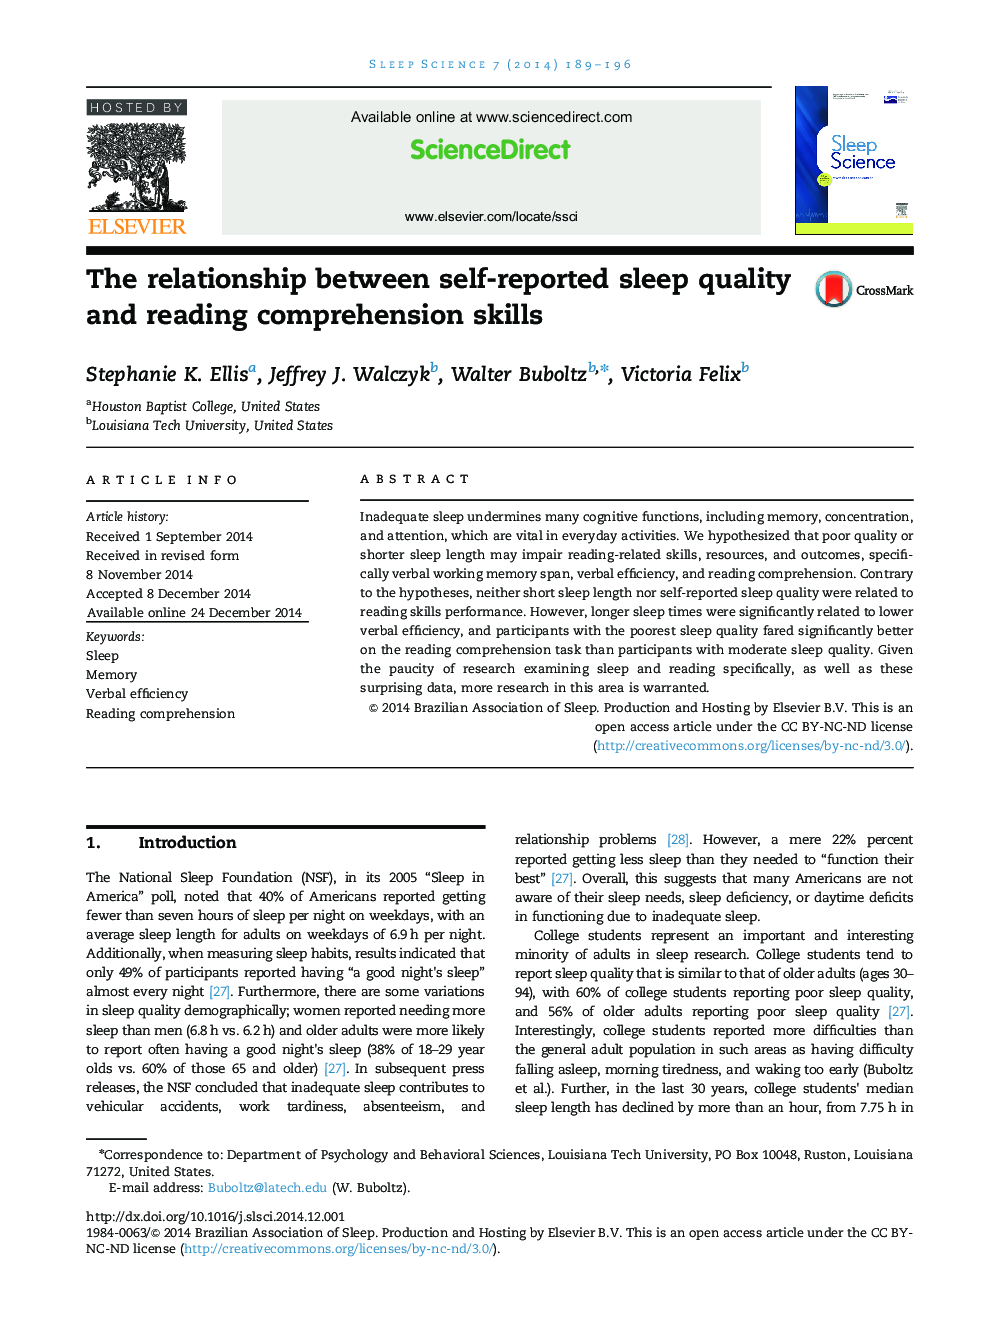 The relationship between self-reported sleep quality and reading comprehension skills